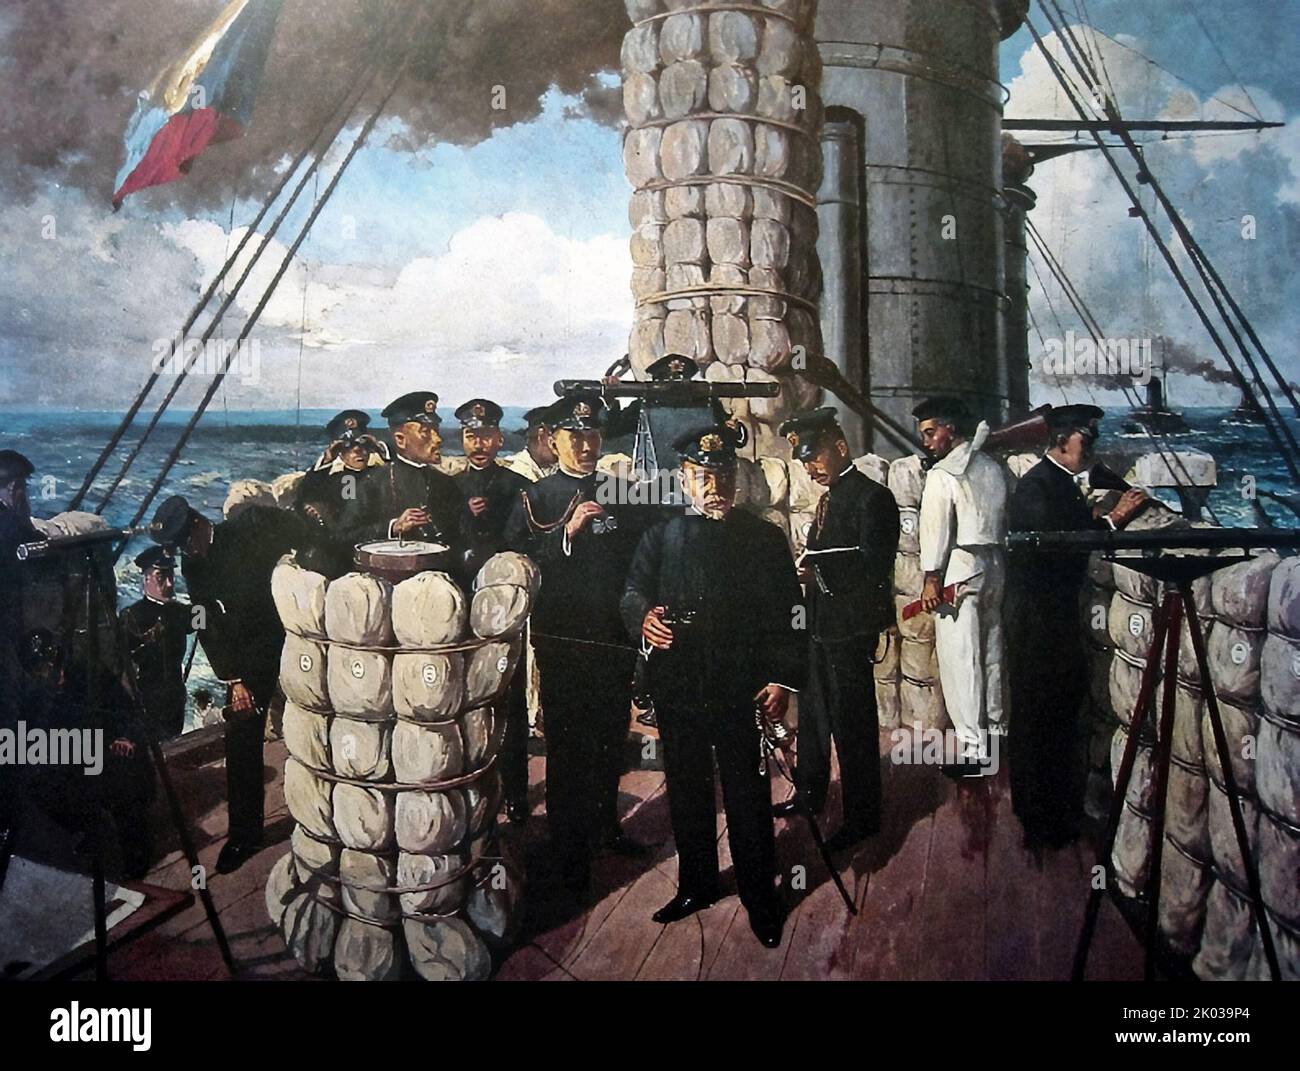 Admiral Togo Heihachiro on the bridge of the Battleship Mikasa. The Battle of Tsushima was a major naval battle fought between Russia and Japan during the Russo-Japanese War. It was fought on 27-28 May 1905 (14-15 May in the Julian calendar then in use in Russia) in the Tsushima Strait located between Korea and southern Japan. Stock Photo